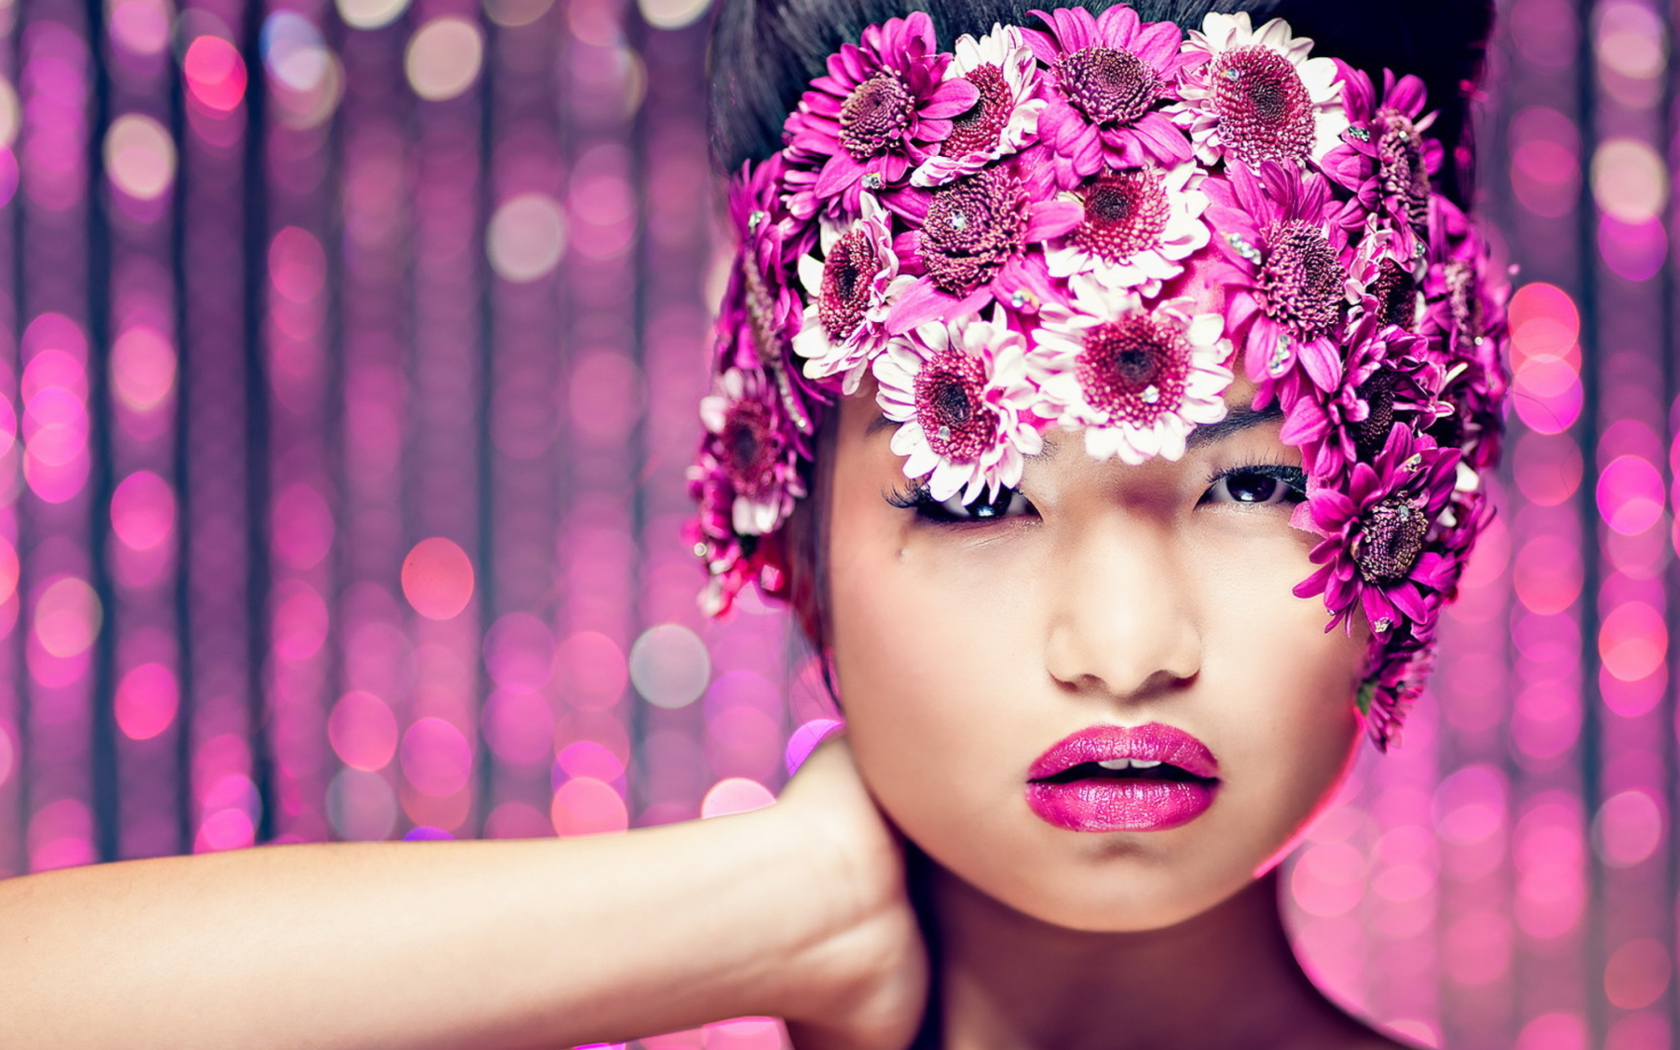 Asian Fashion Model With Pink Flower Wreath wallpaper 1680x1050